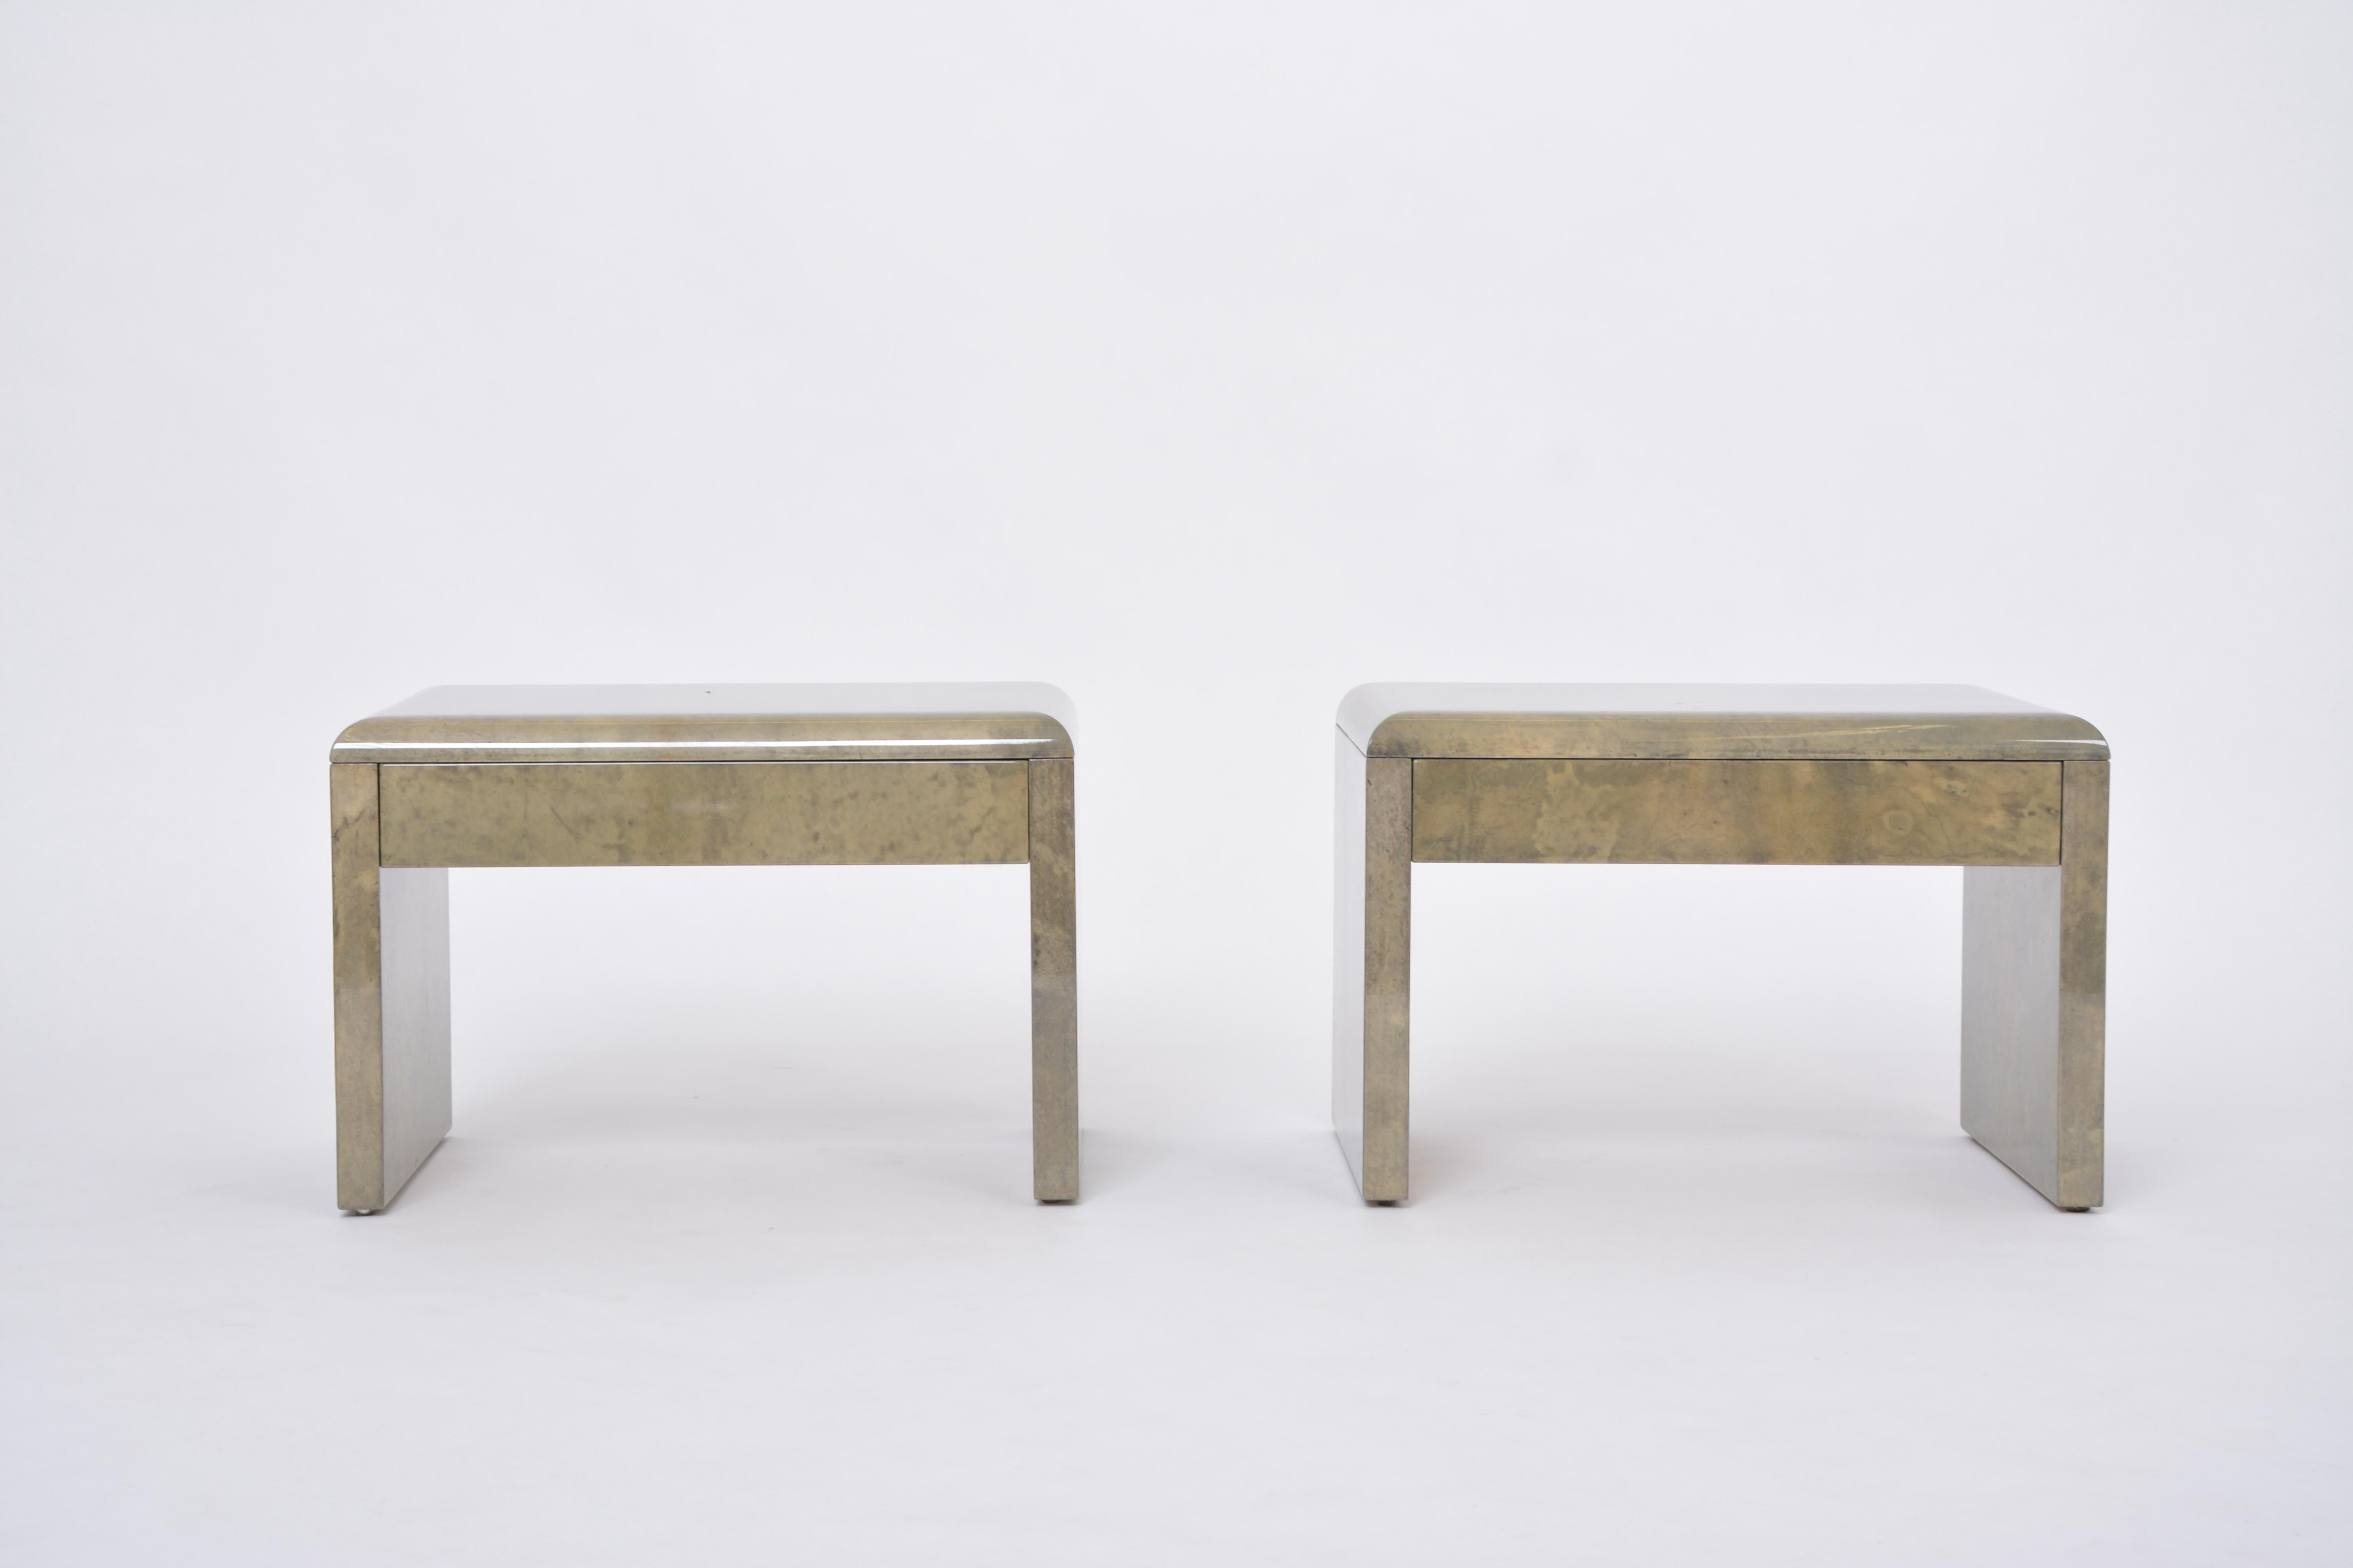 Italian Mid-Century Modern Bedside Tables Made of Laquered Goat Skin by Aldo Tura